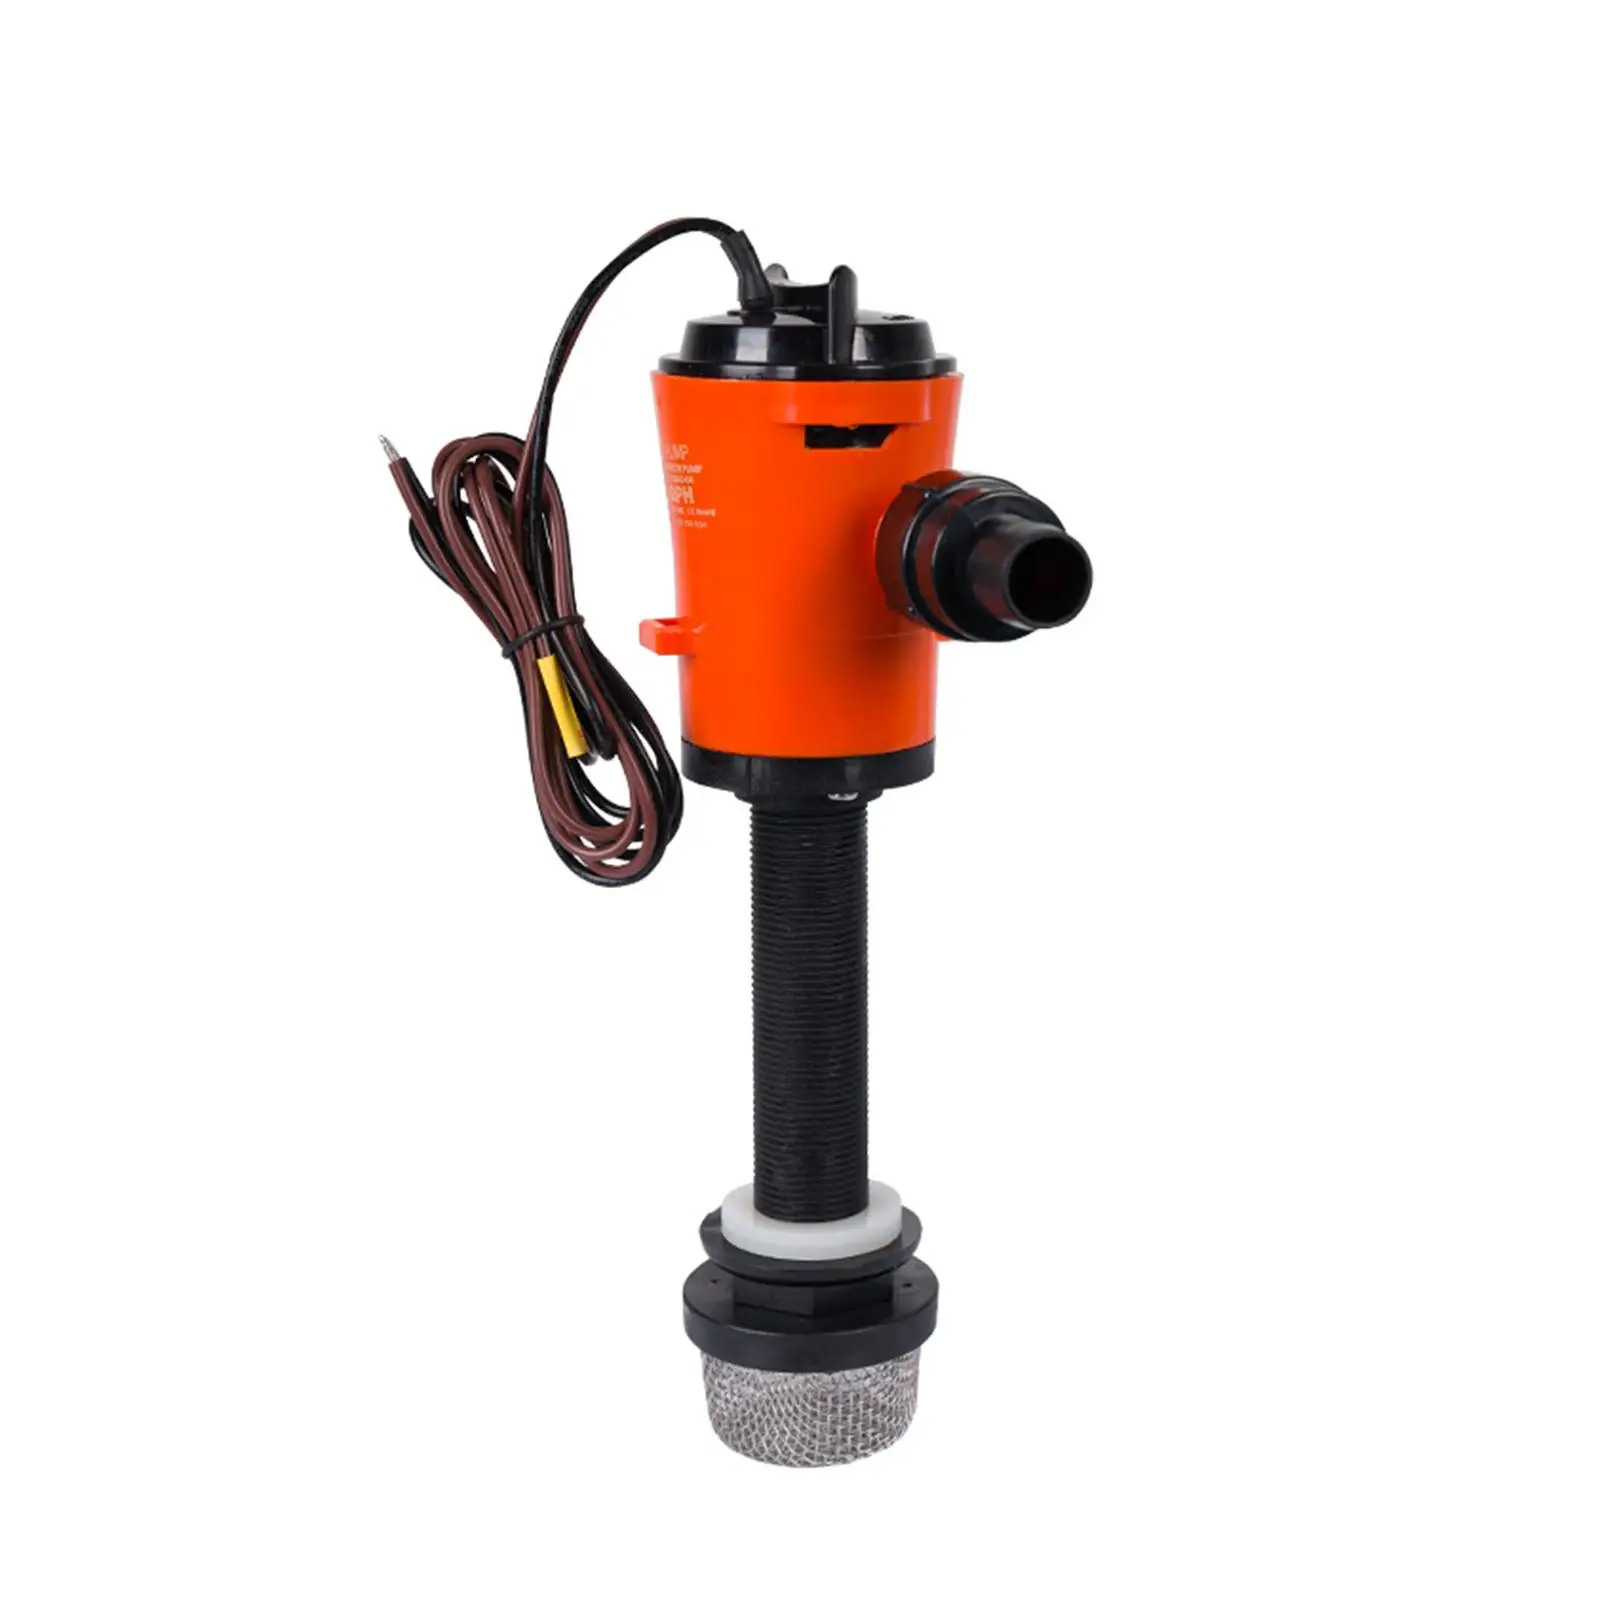 Livewell Pump Accessory Replacement Easy to Install Submersible with Filter Boat Tools Professional 24V 800GPH Boat Aerator Pump